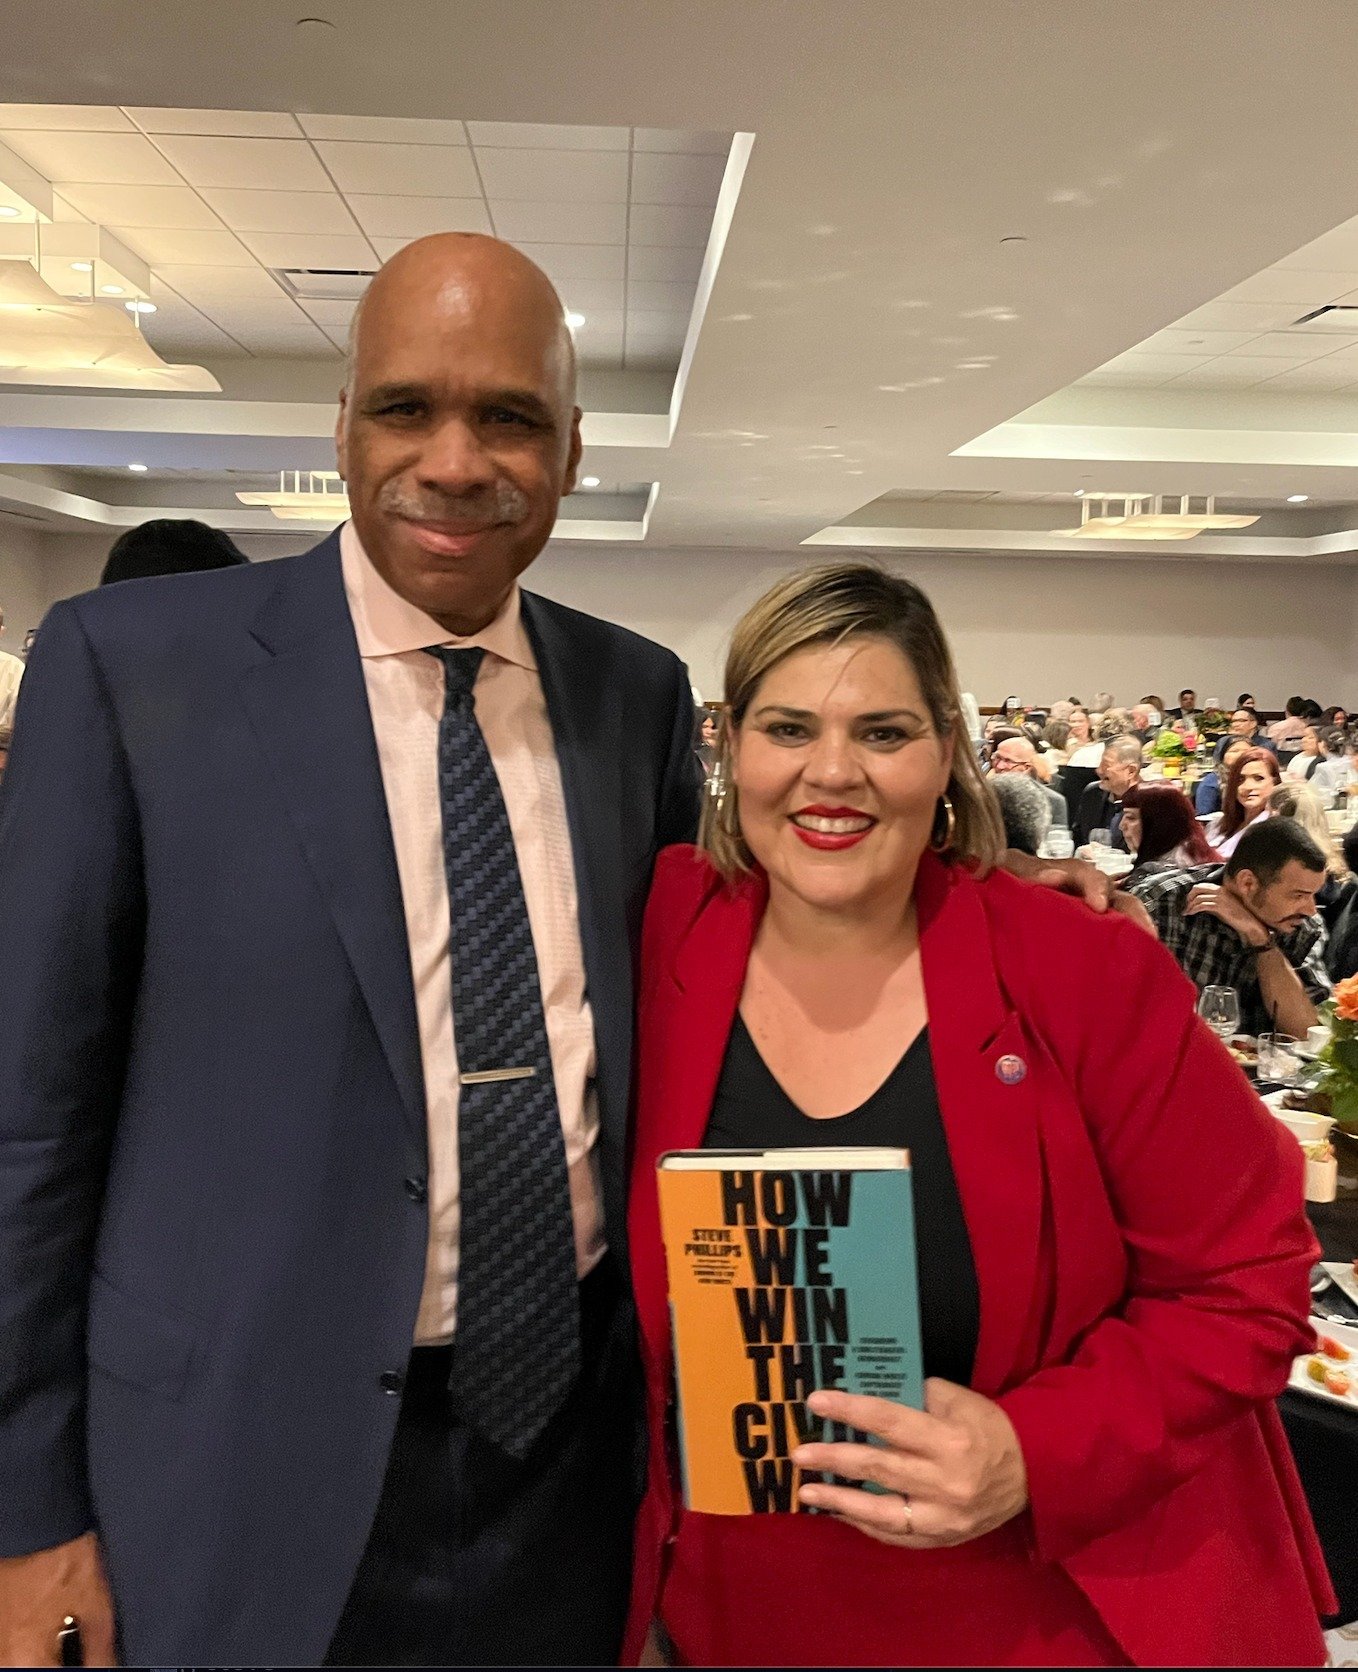 This week's podcast guest will be @teranforarizona who is running to replace Arizona @reprubengallego's House seat. 

Here she is w/ @sphilli holding up #HowWeWin the Civil War!

🤩